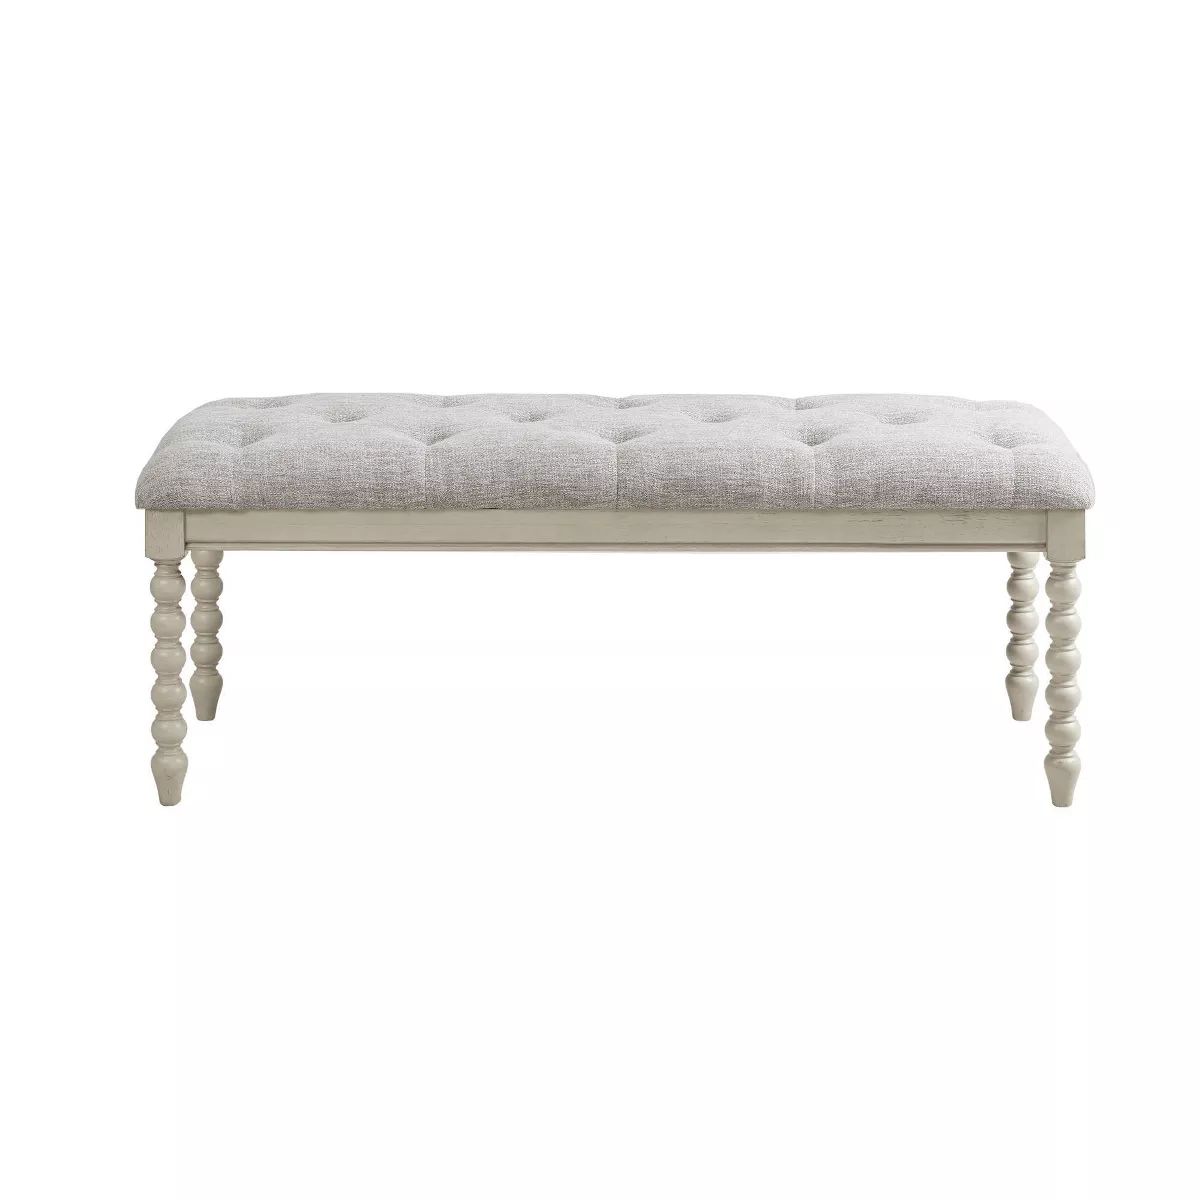 Beckett Tufted Accent Bench Light Gray/Natural - Madison Park Signature | Target